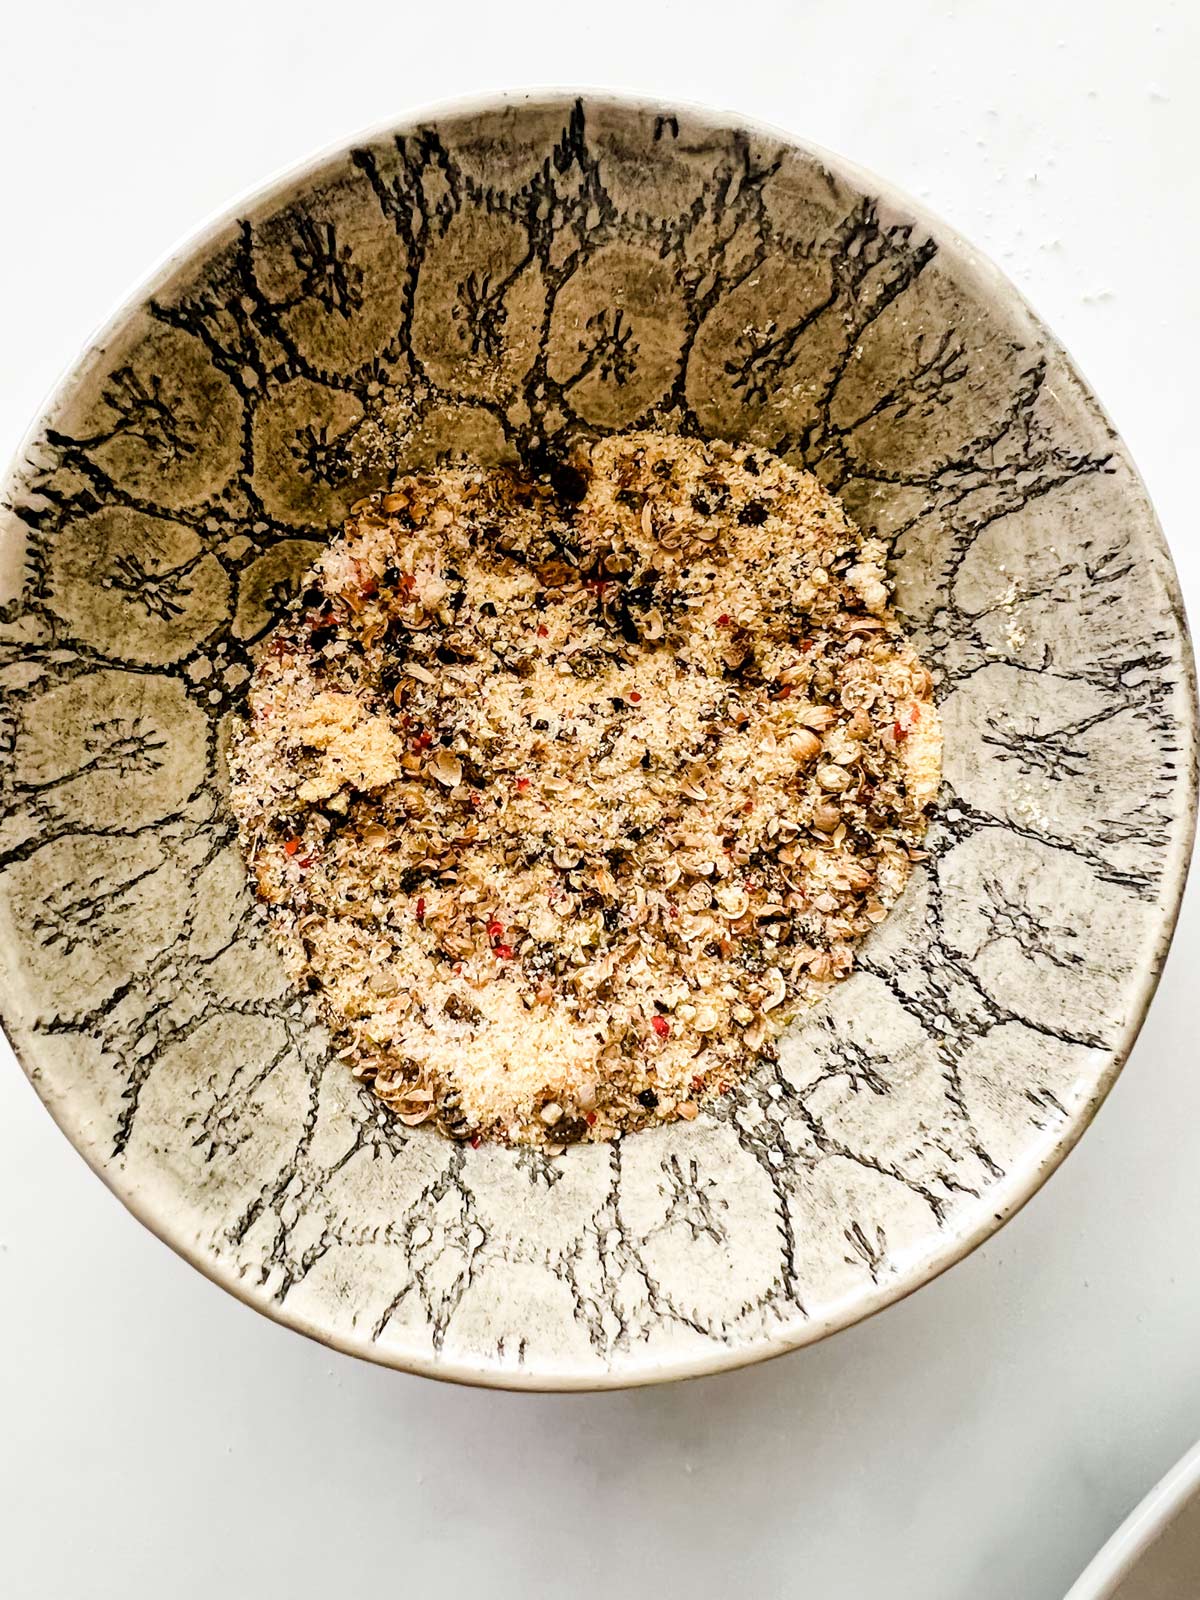 Crushed peppercorns, salt, and garlic powder in a small bowl.